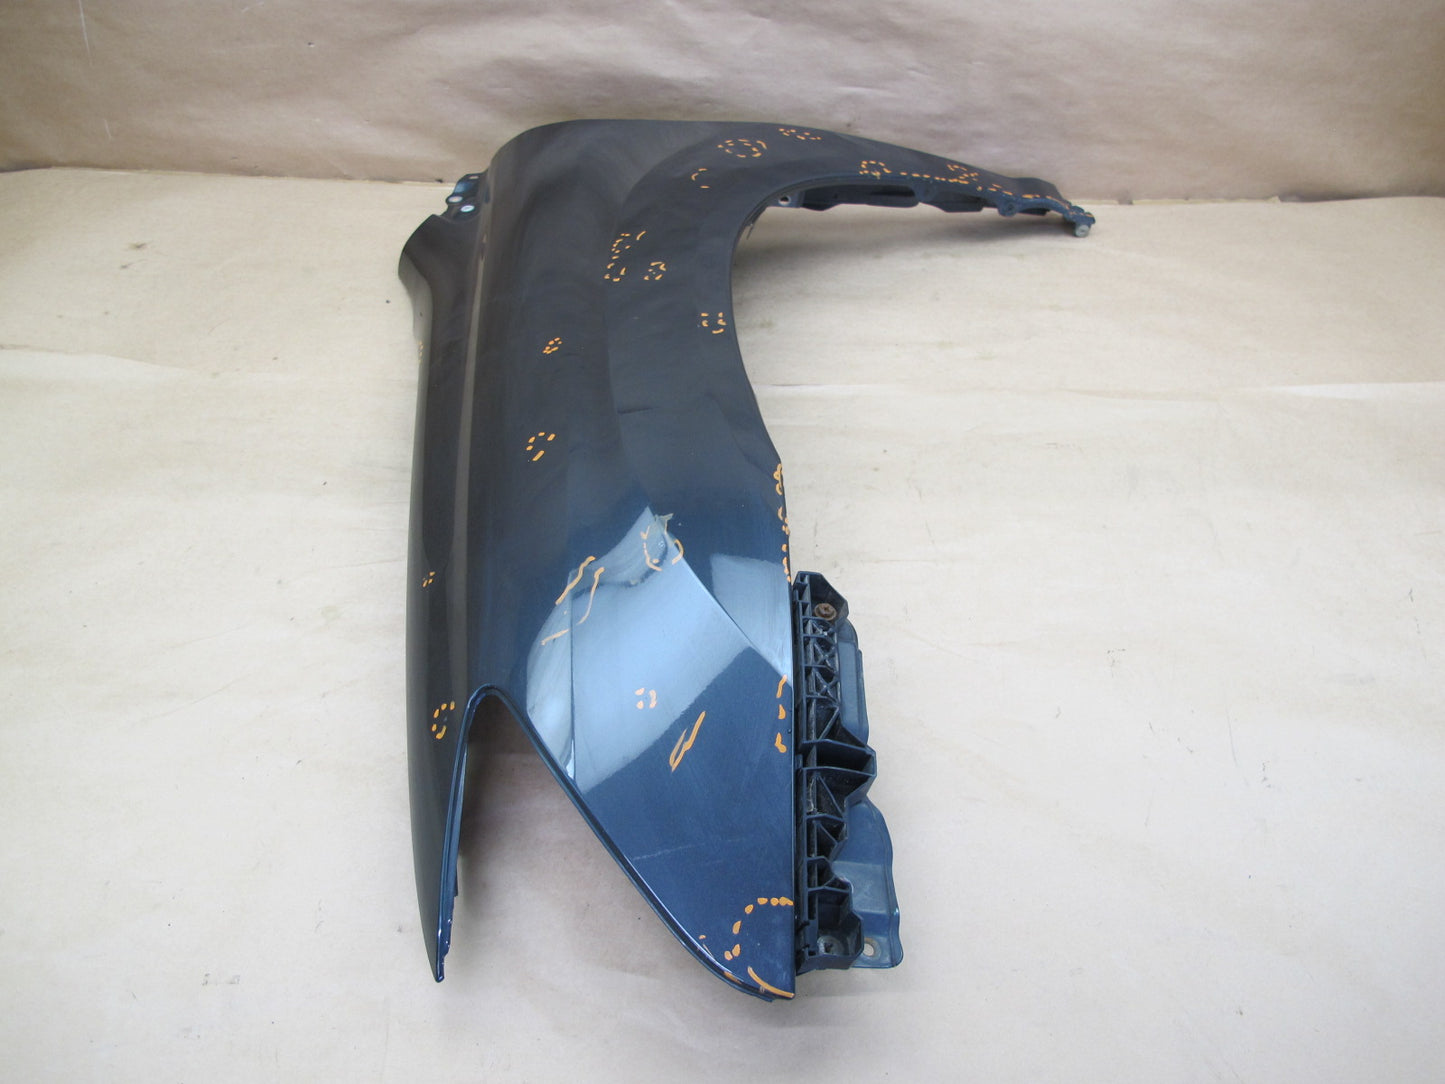 06-08 LEXUS XU30 RX400h FRONT LEFT FENDER SHELL COVER PANEL OEM